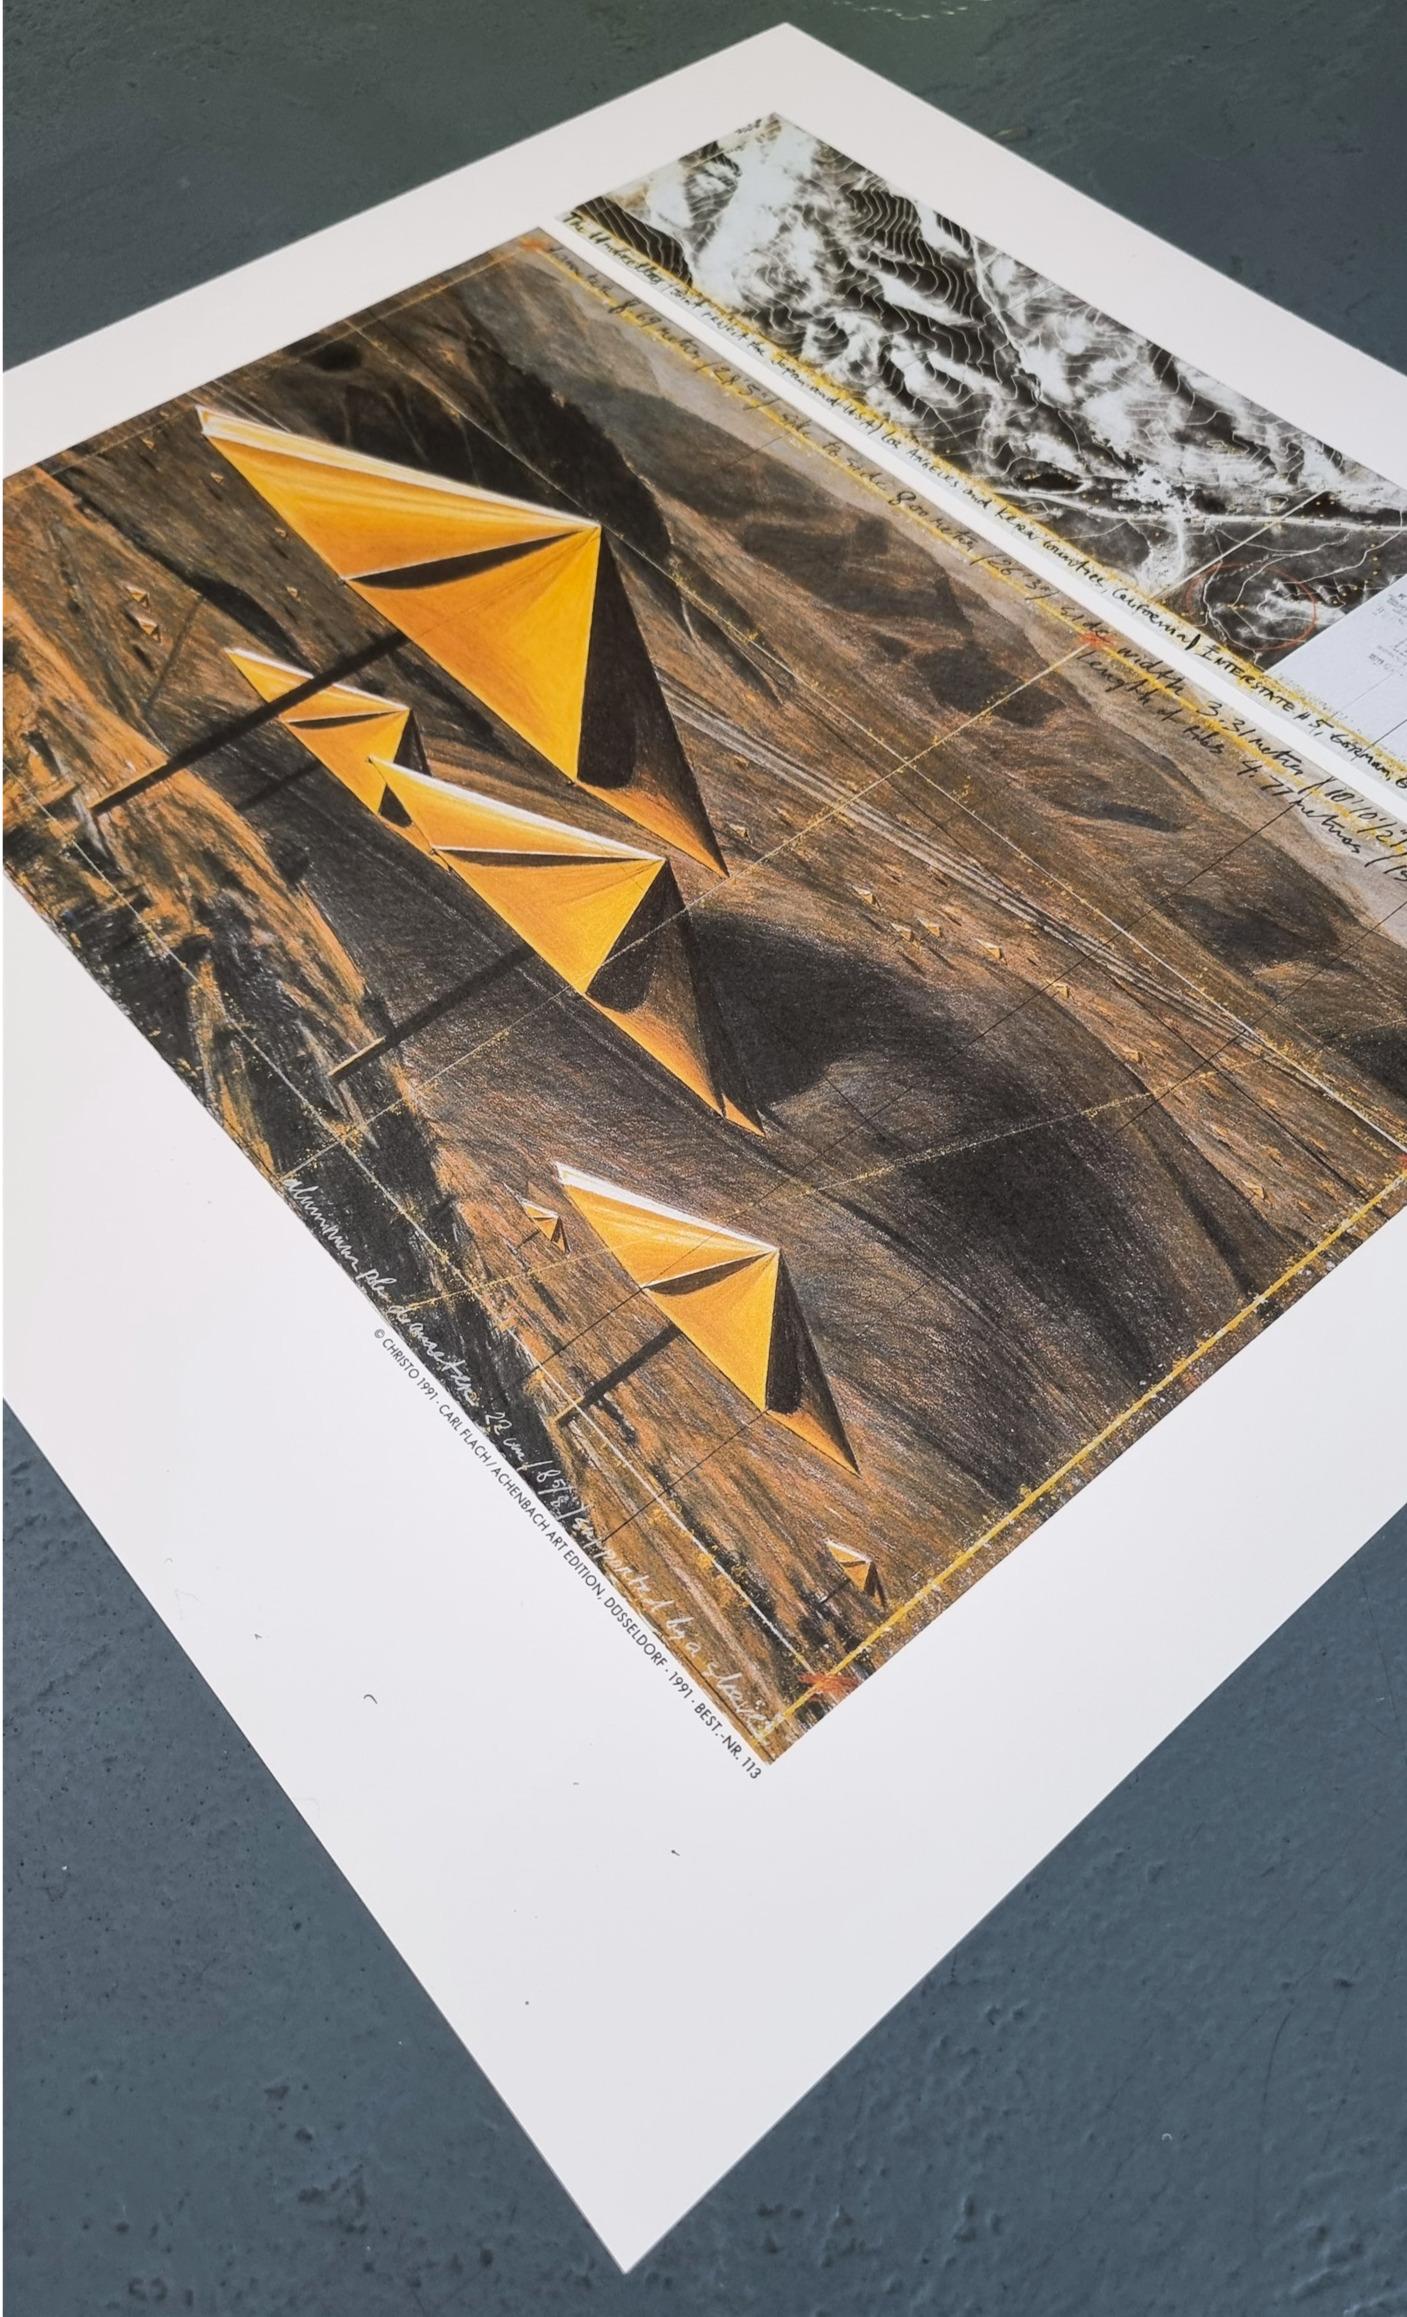 The Umbrellas (Yellow) - Print by Christo and Jeanne-Claude